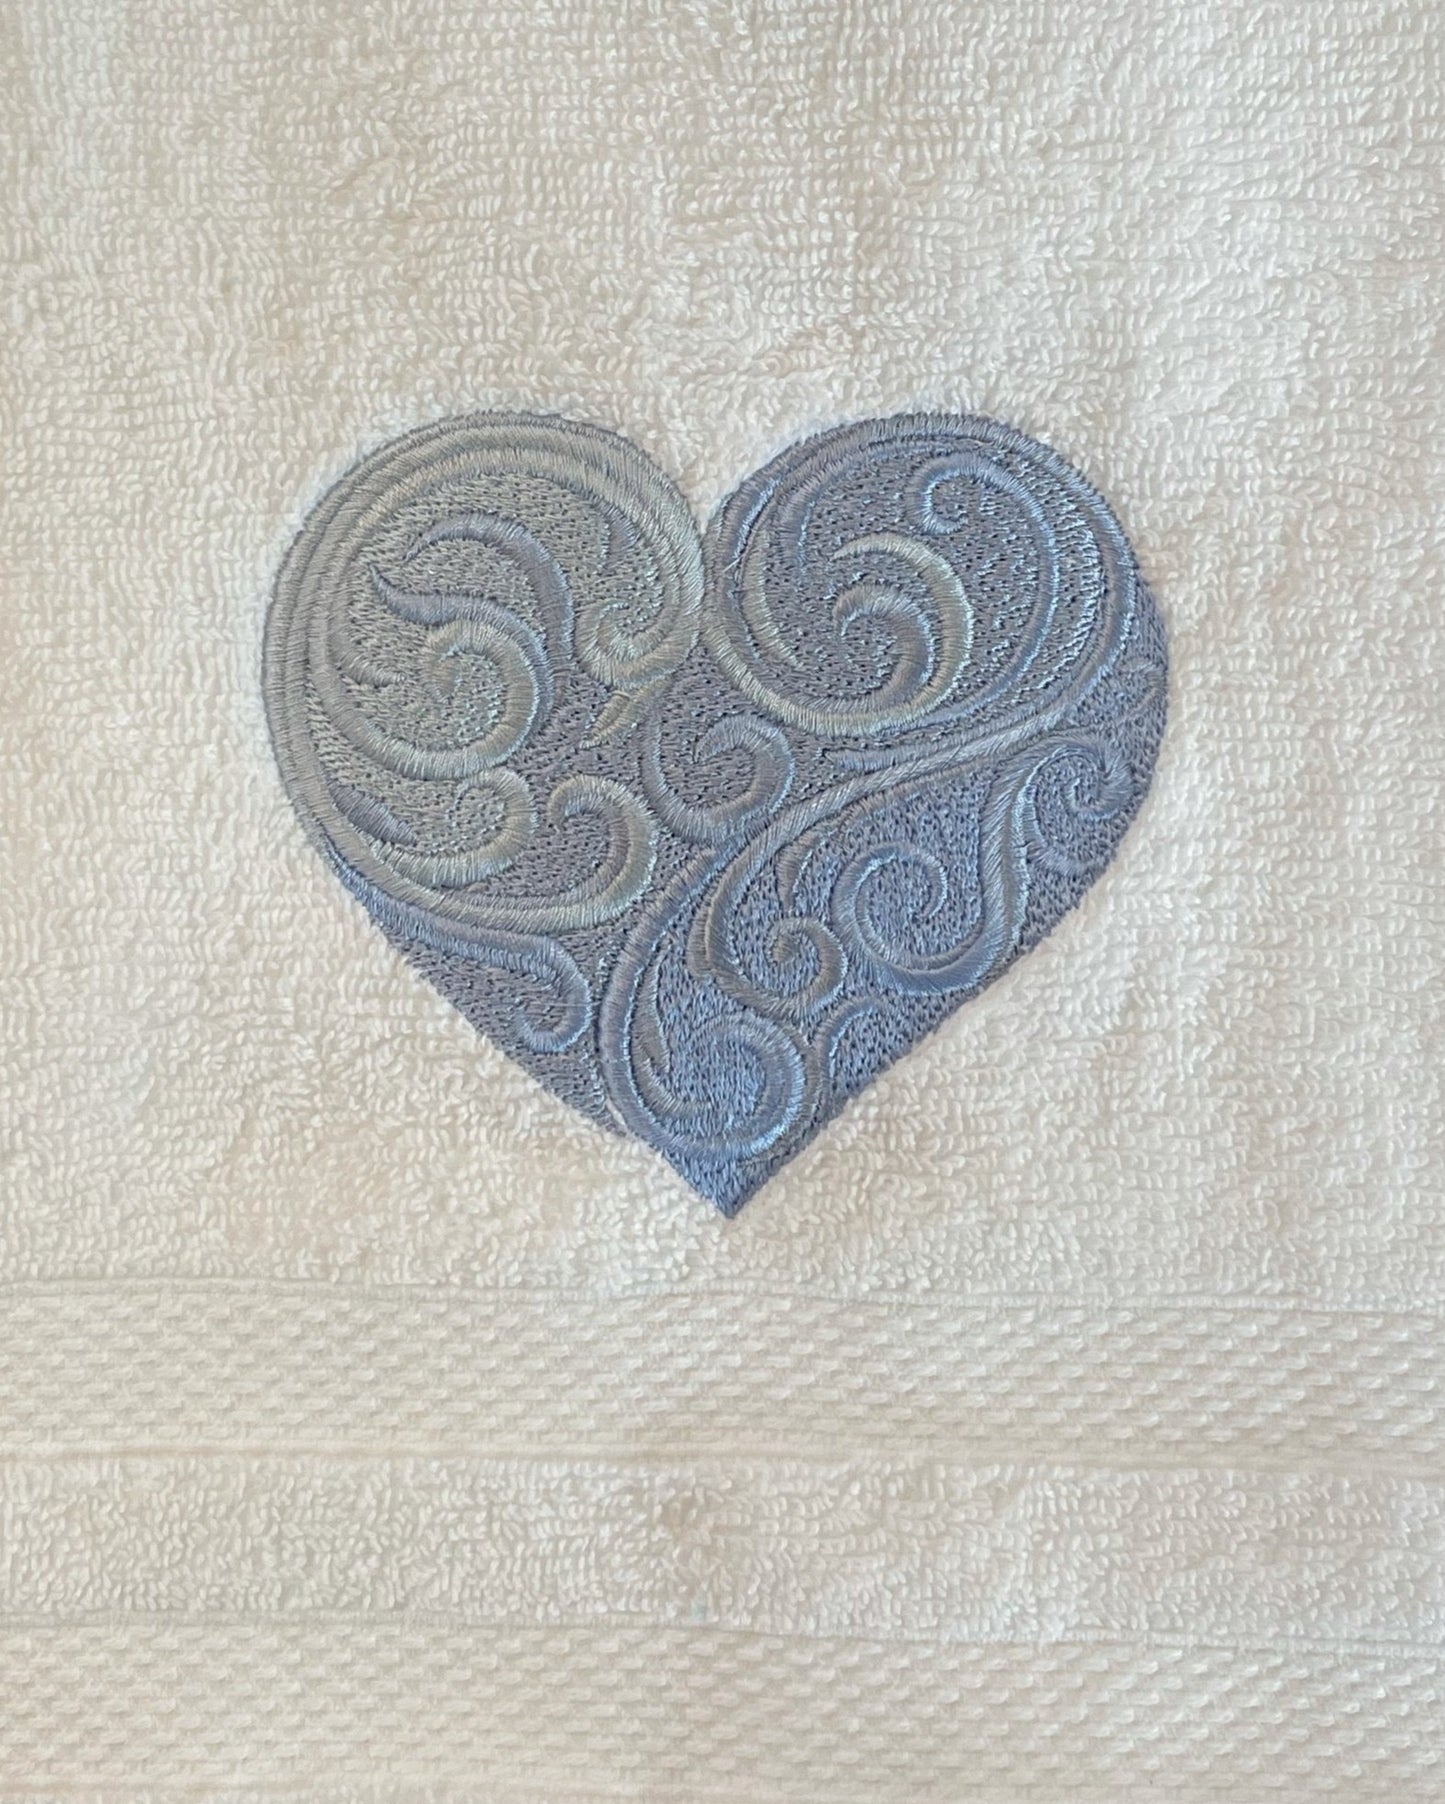 Heart Embroidered Guest Bath Hand Towel. Beautiful Baroque Heart in shades of Blue